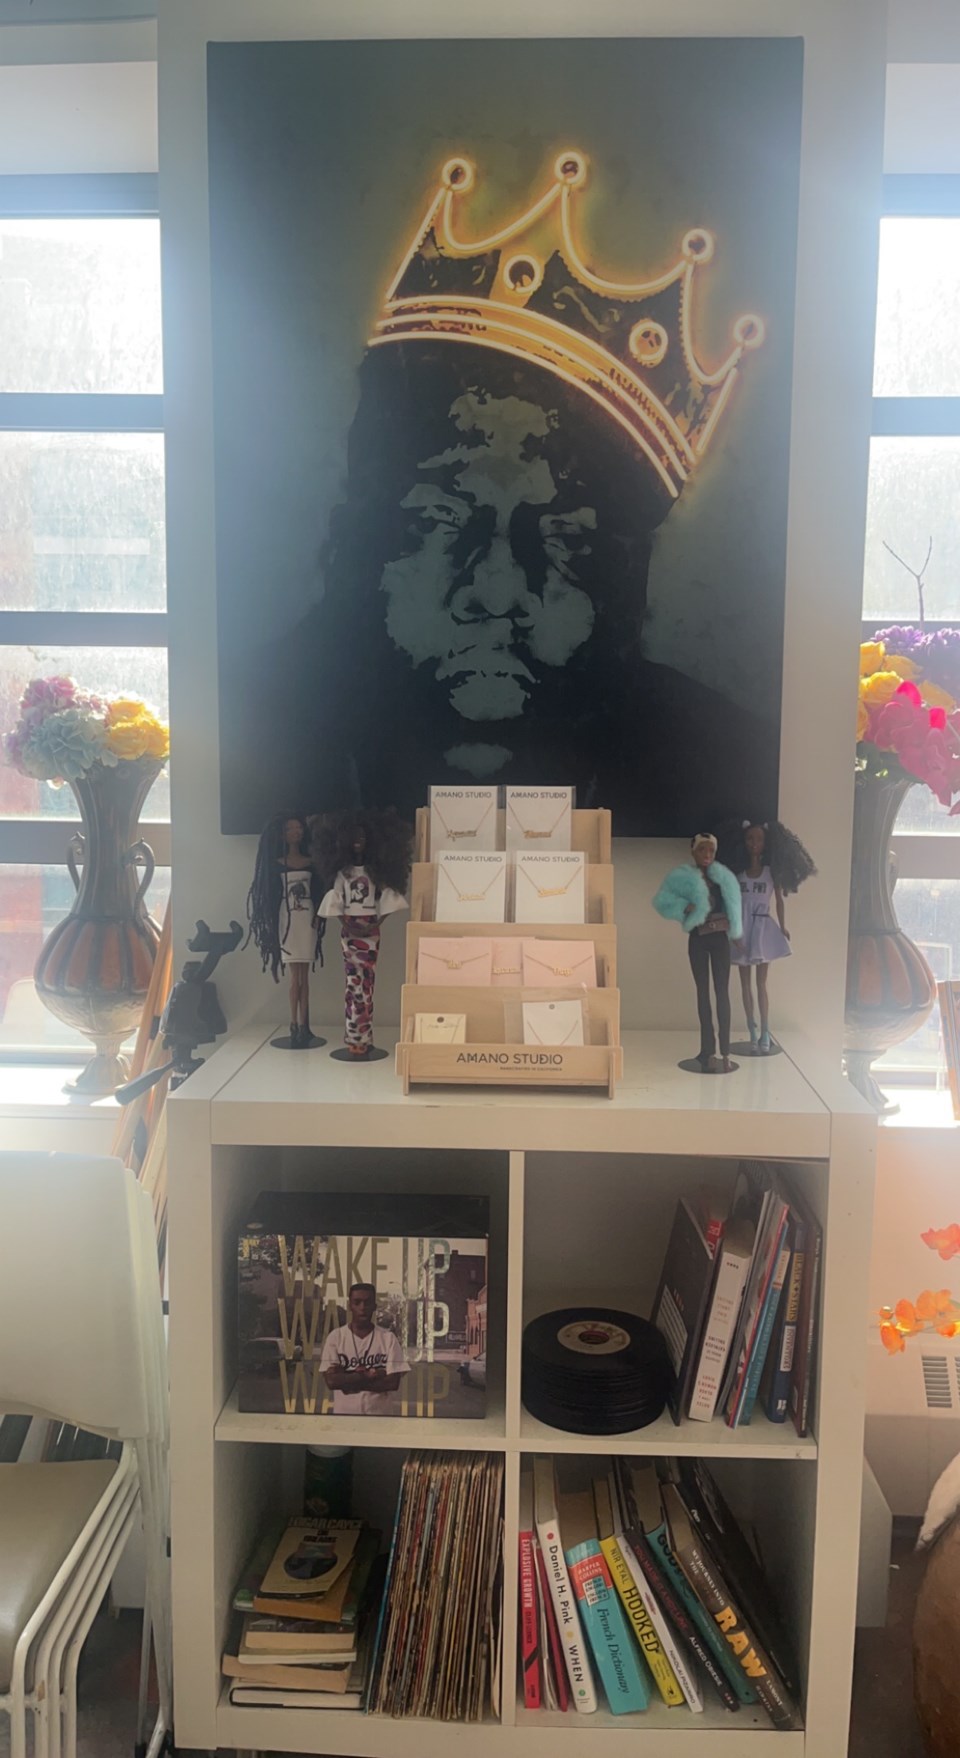 Notorious B.I.G. is a staple at Hip Hop Closet space
Photo: Natasha Knows for BK Reader